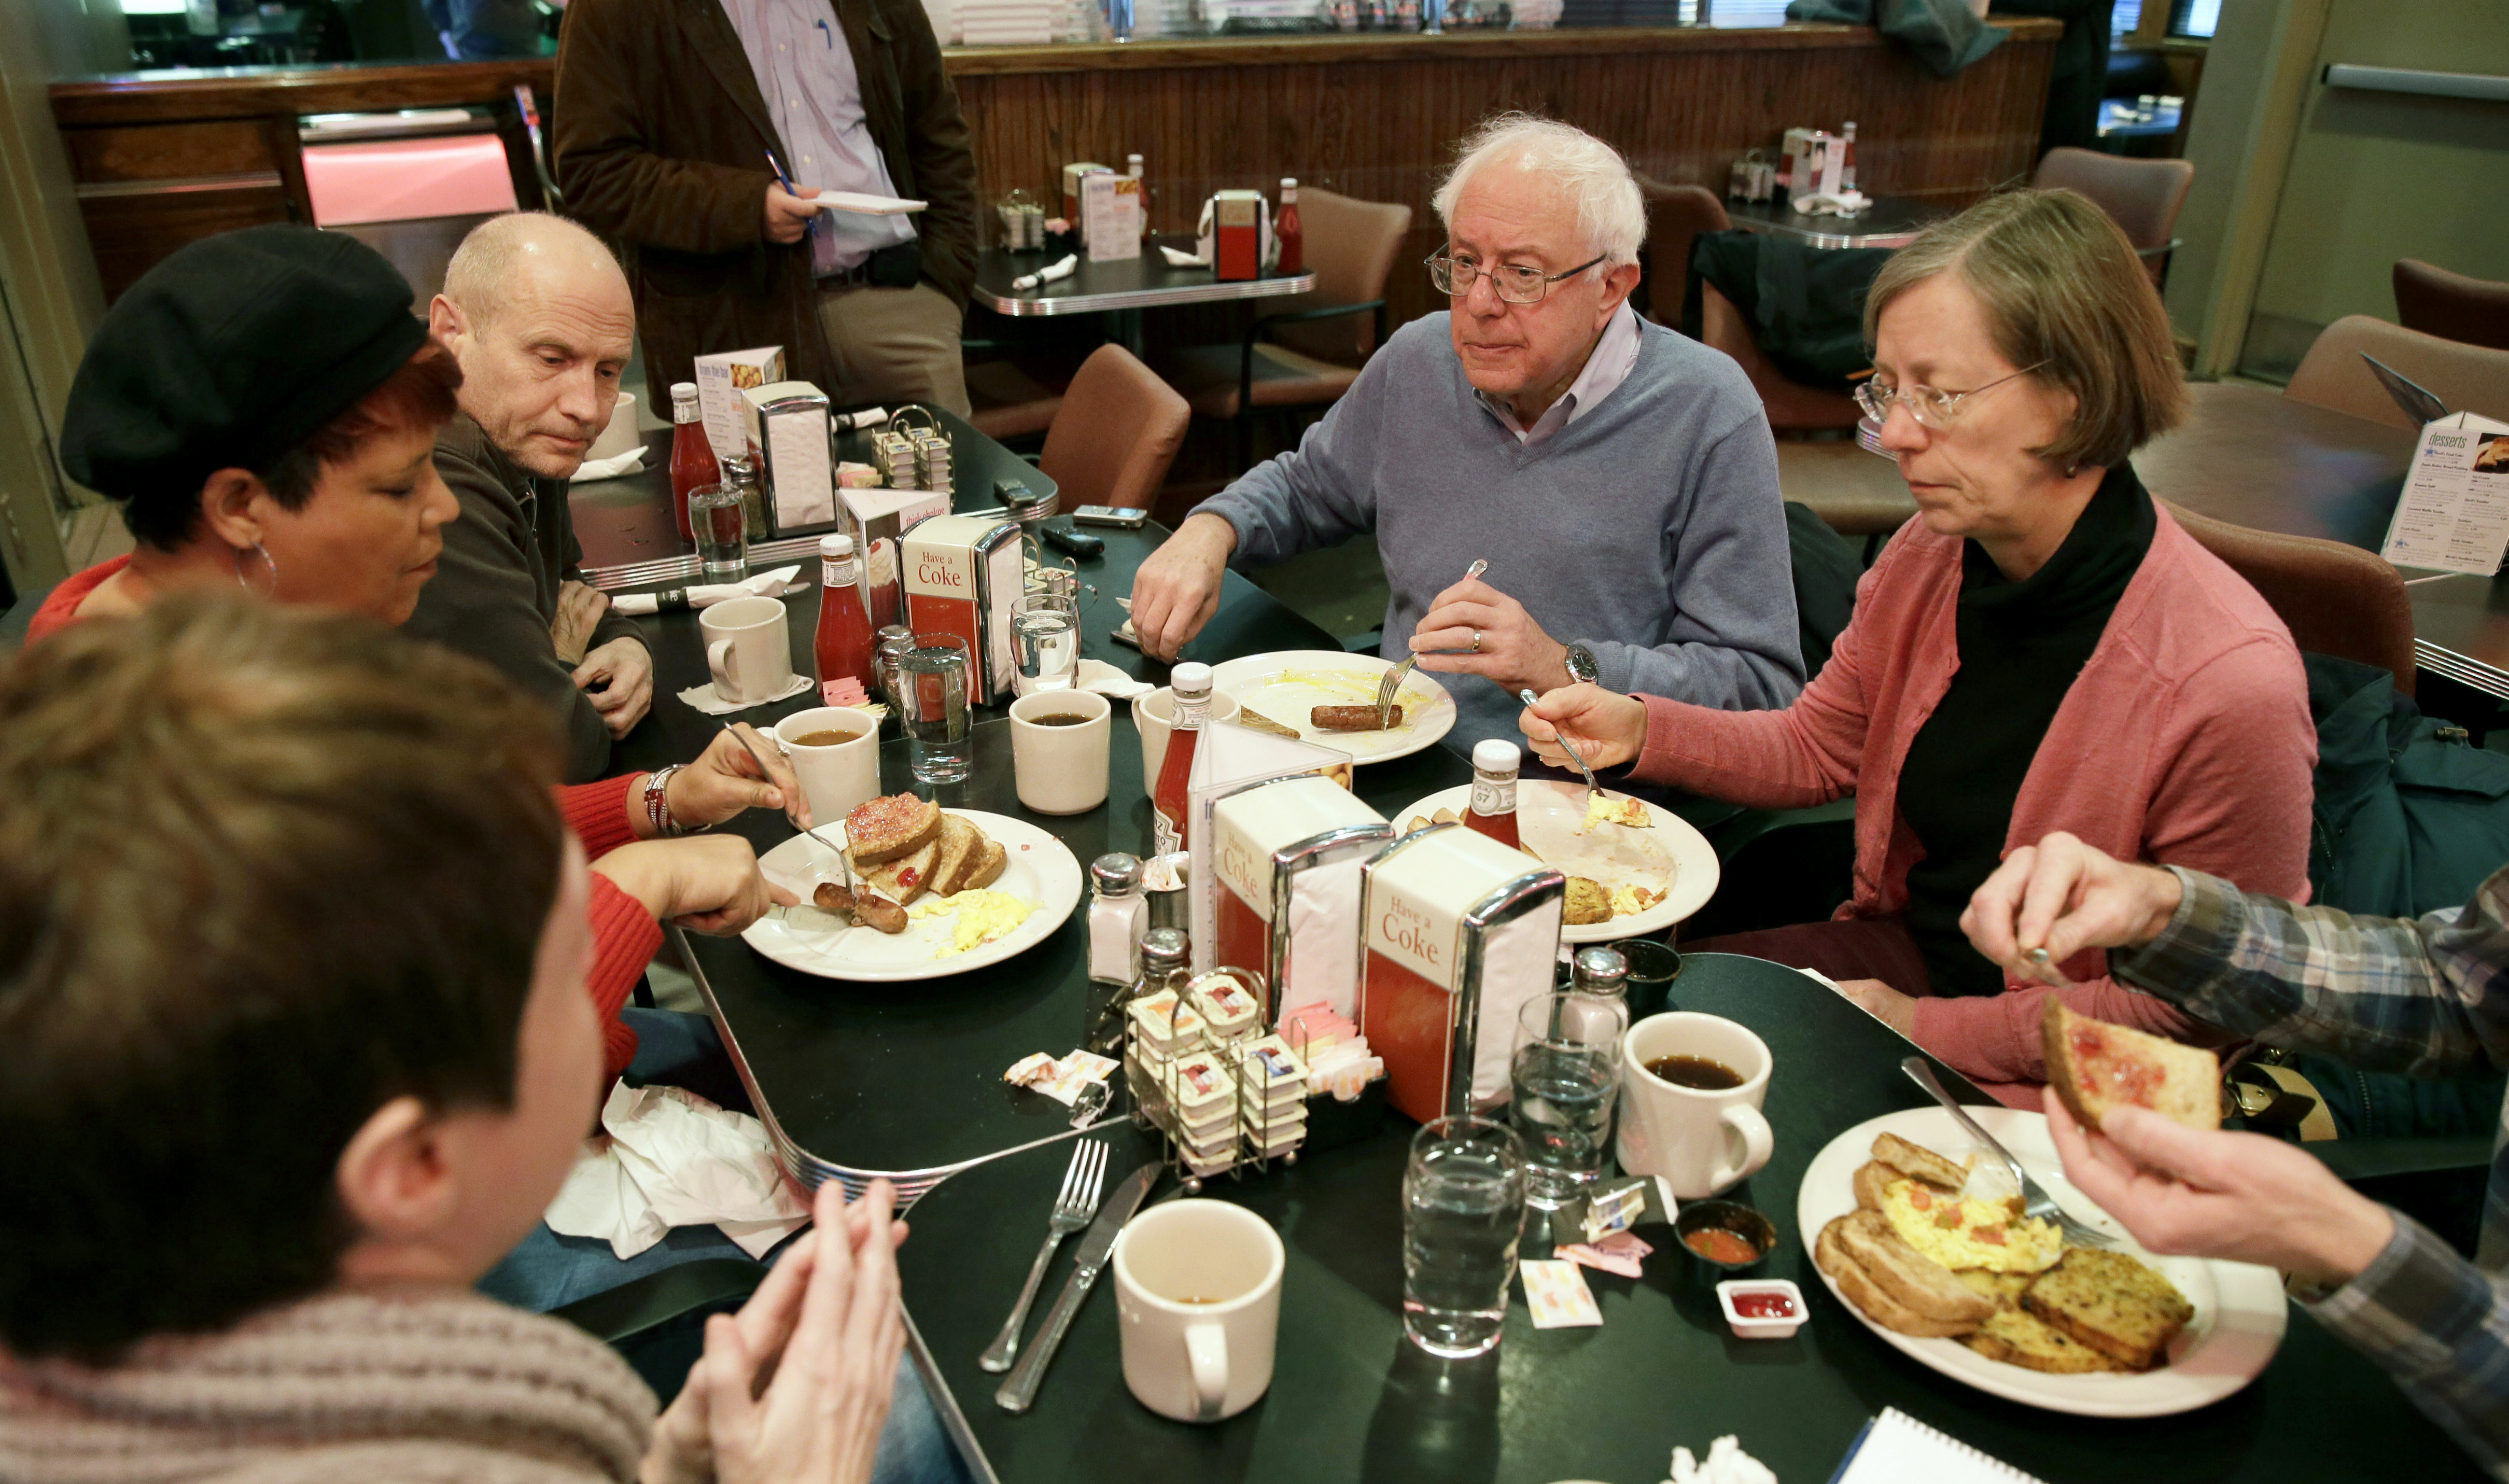 If you want to run for president, you better plan on having breakfasts in Iowa at least two years before an election, as Sen. Bernie Sanders, did in 2014. (AP Photo/Charlie Neibergall)